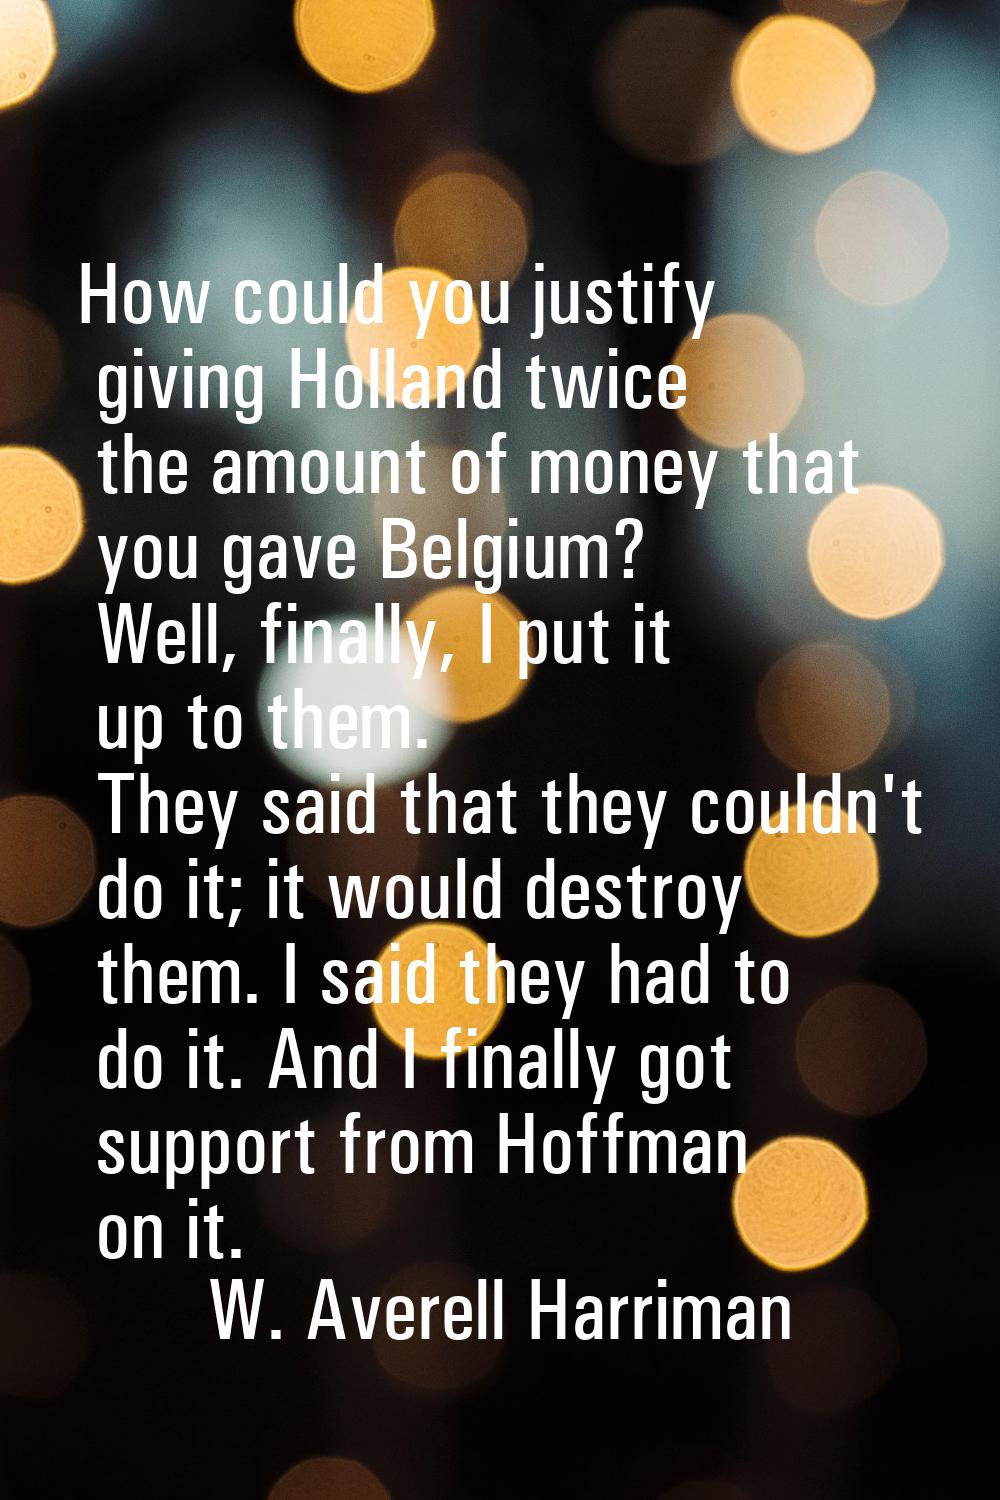 How could you justify giving Holland twice the amount of money that you gave Belgium? Well, finally